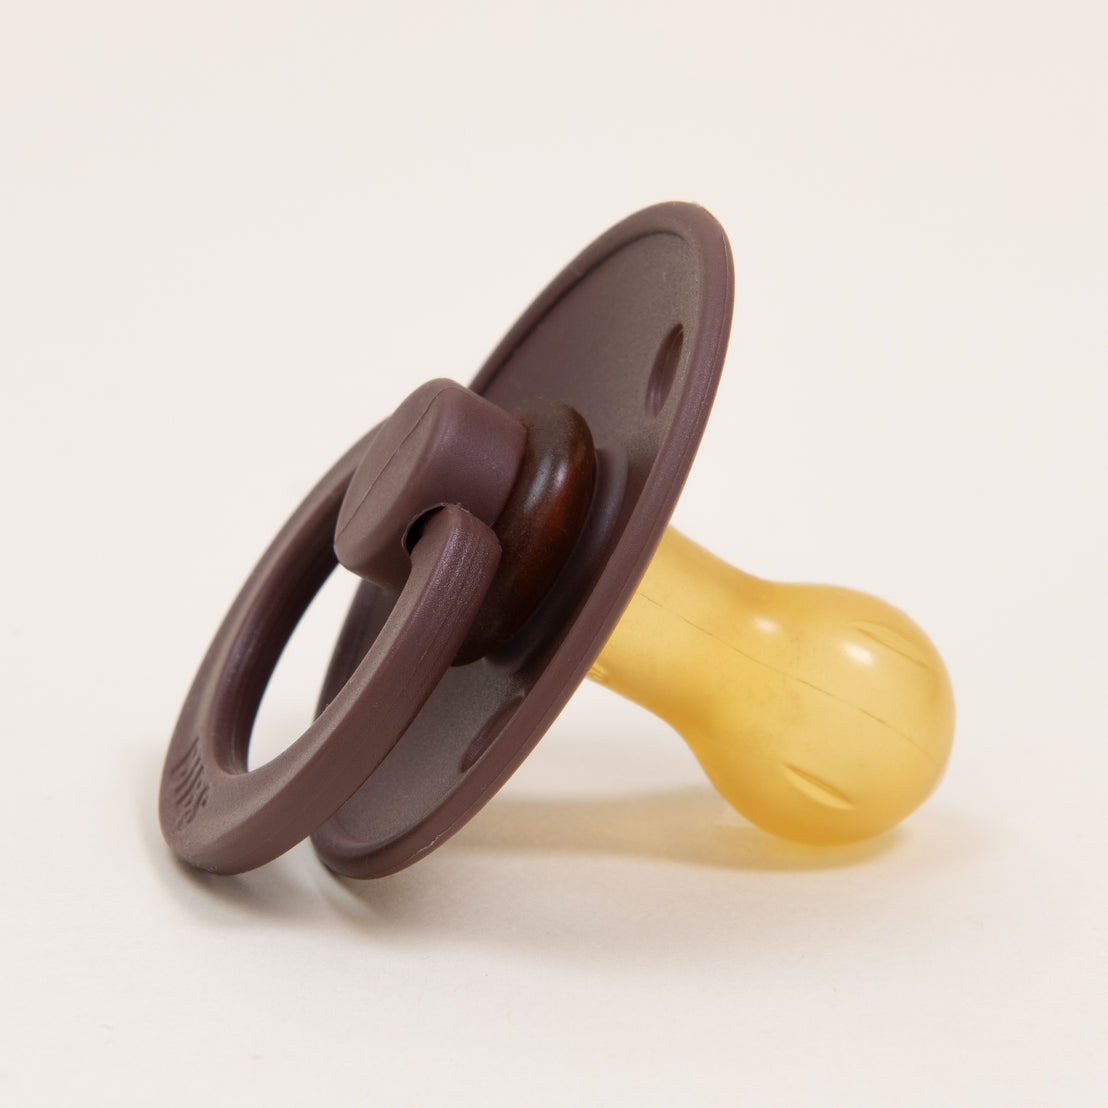 A close-up image of a Bibs Pacifier in Chestnut with a brown handle and a beige rubber nipple on a white background.